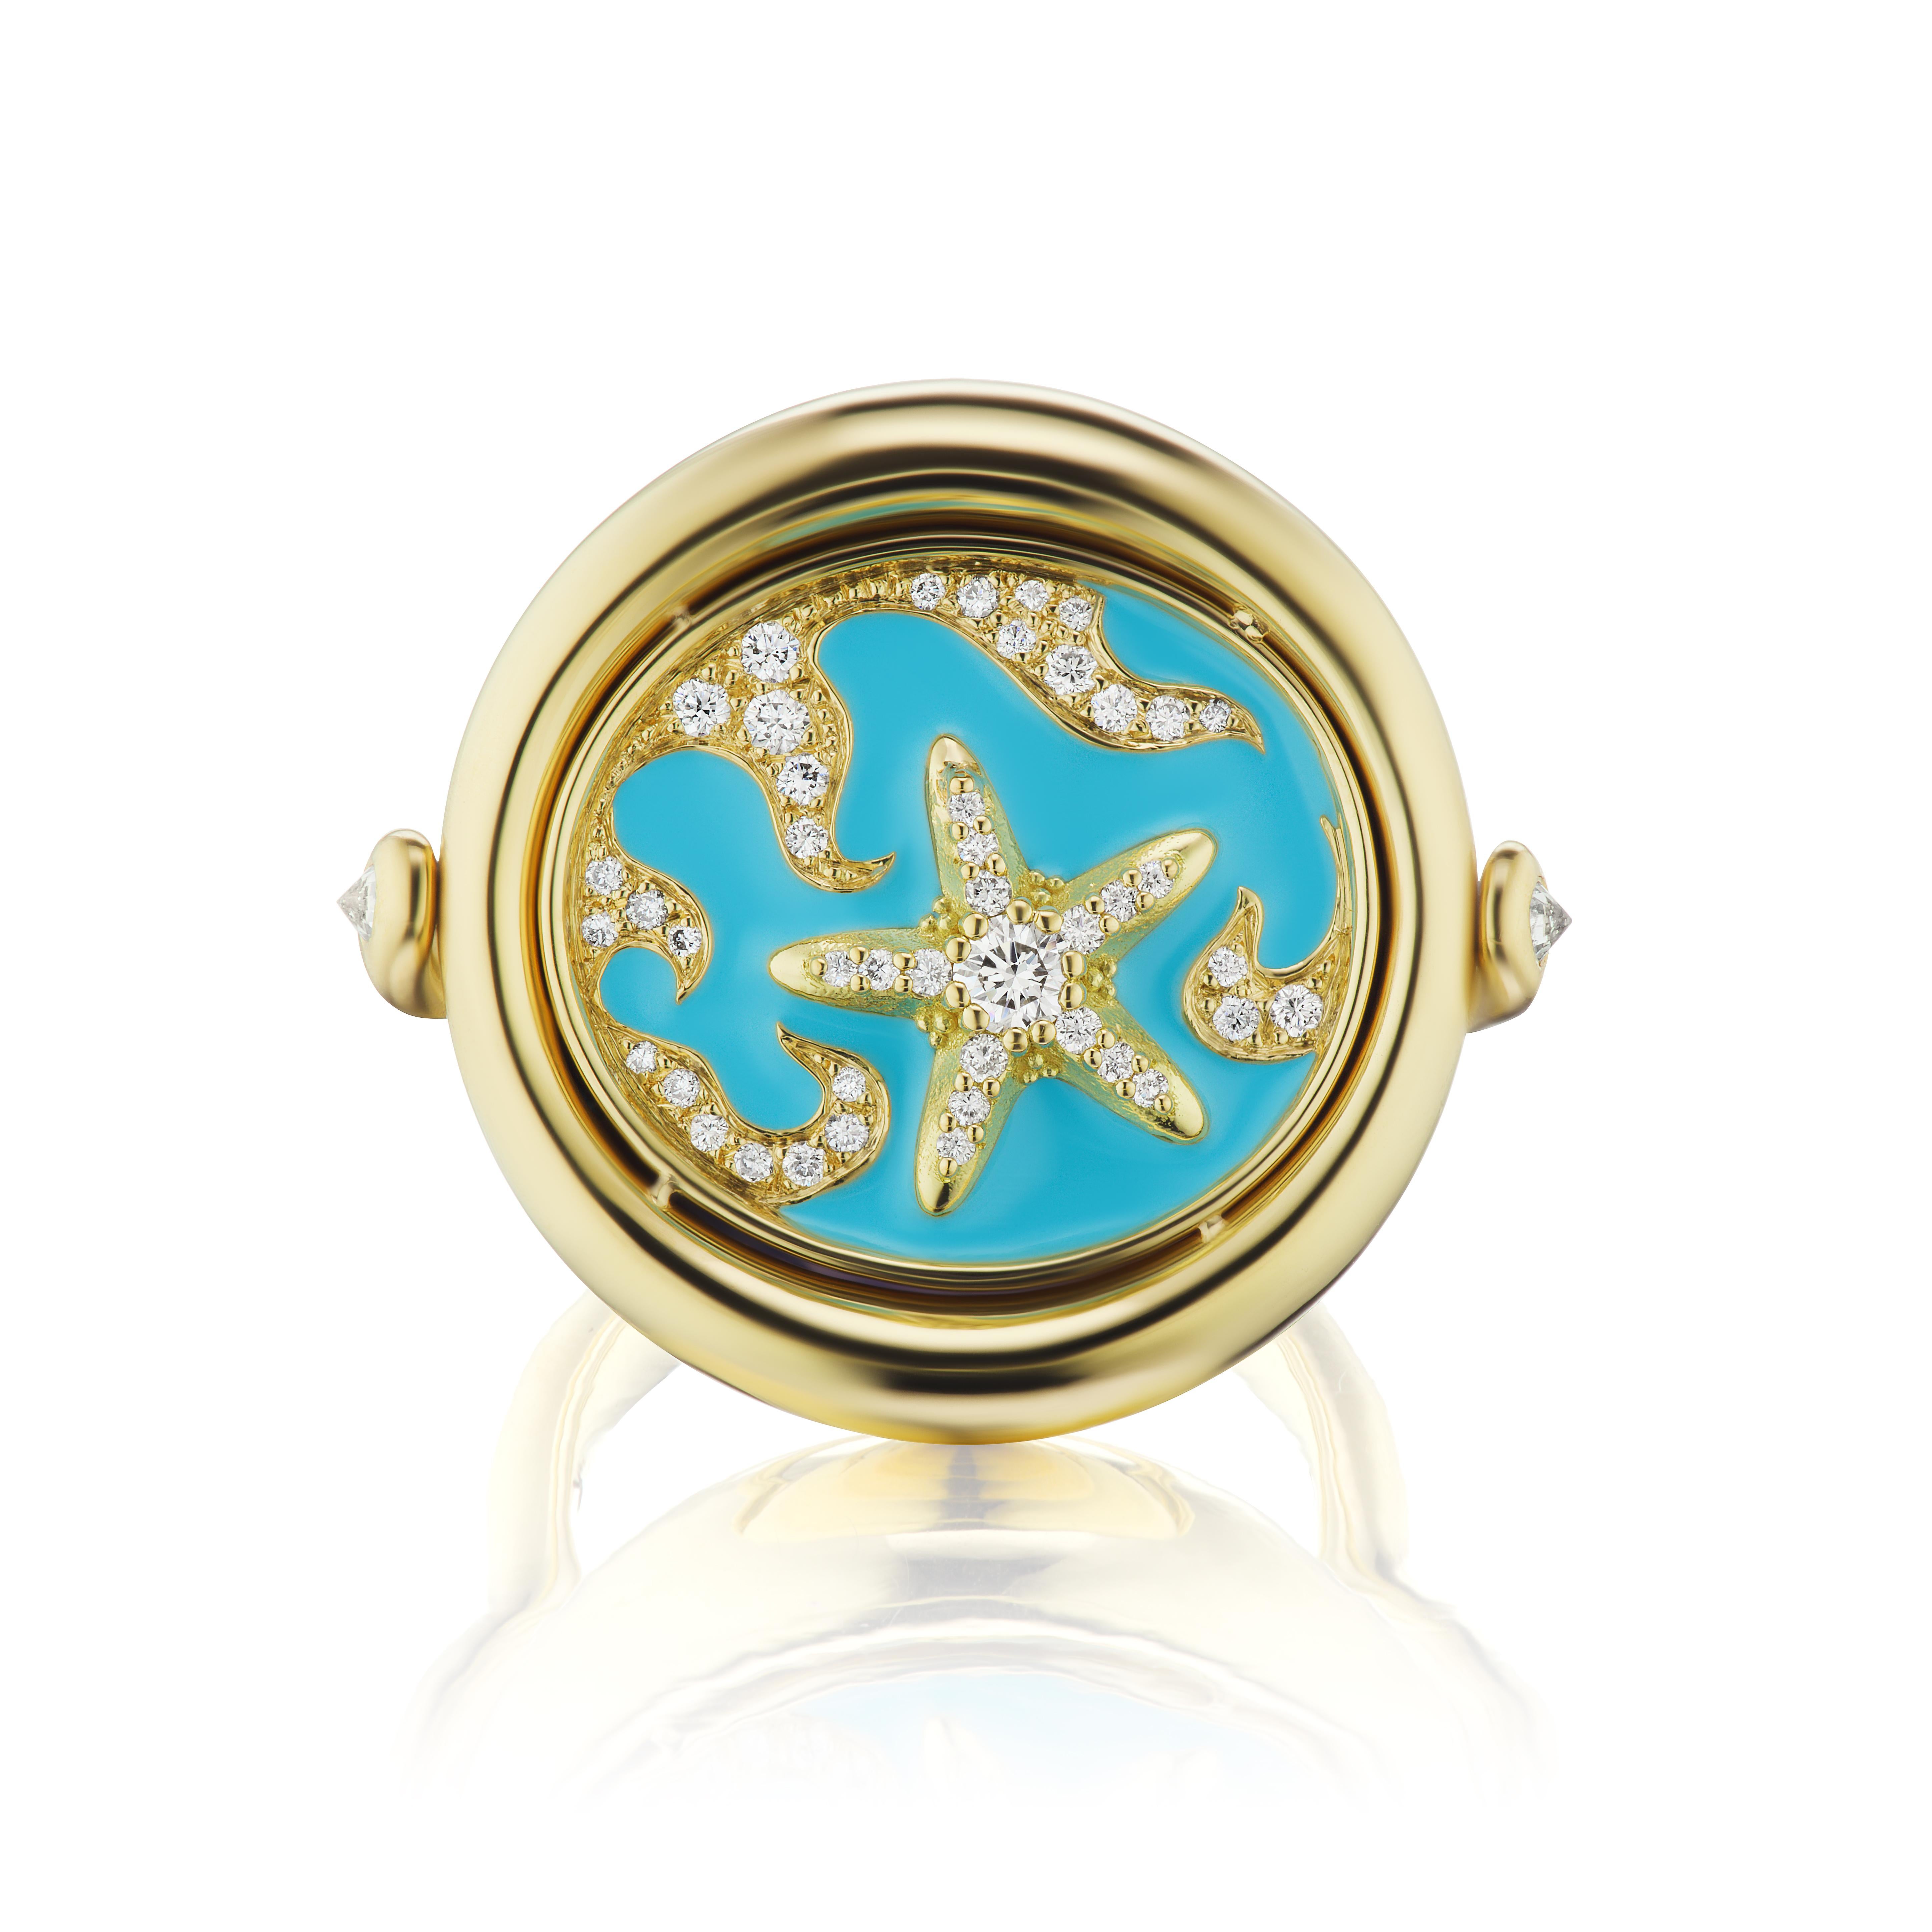 18k Yellow Gold, Brazilian Agate Cameo, 1.01ct Diamonds, and Blue Enamel

Design Inspiration 

Japanese paintings inspired the Water Ring.  A hand-carved wave cameo floats in a sea of blue enamel, and diamond waves connect you to the power of the